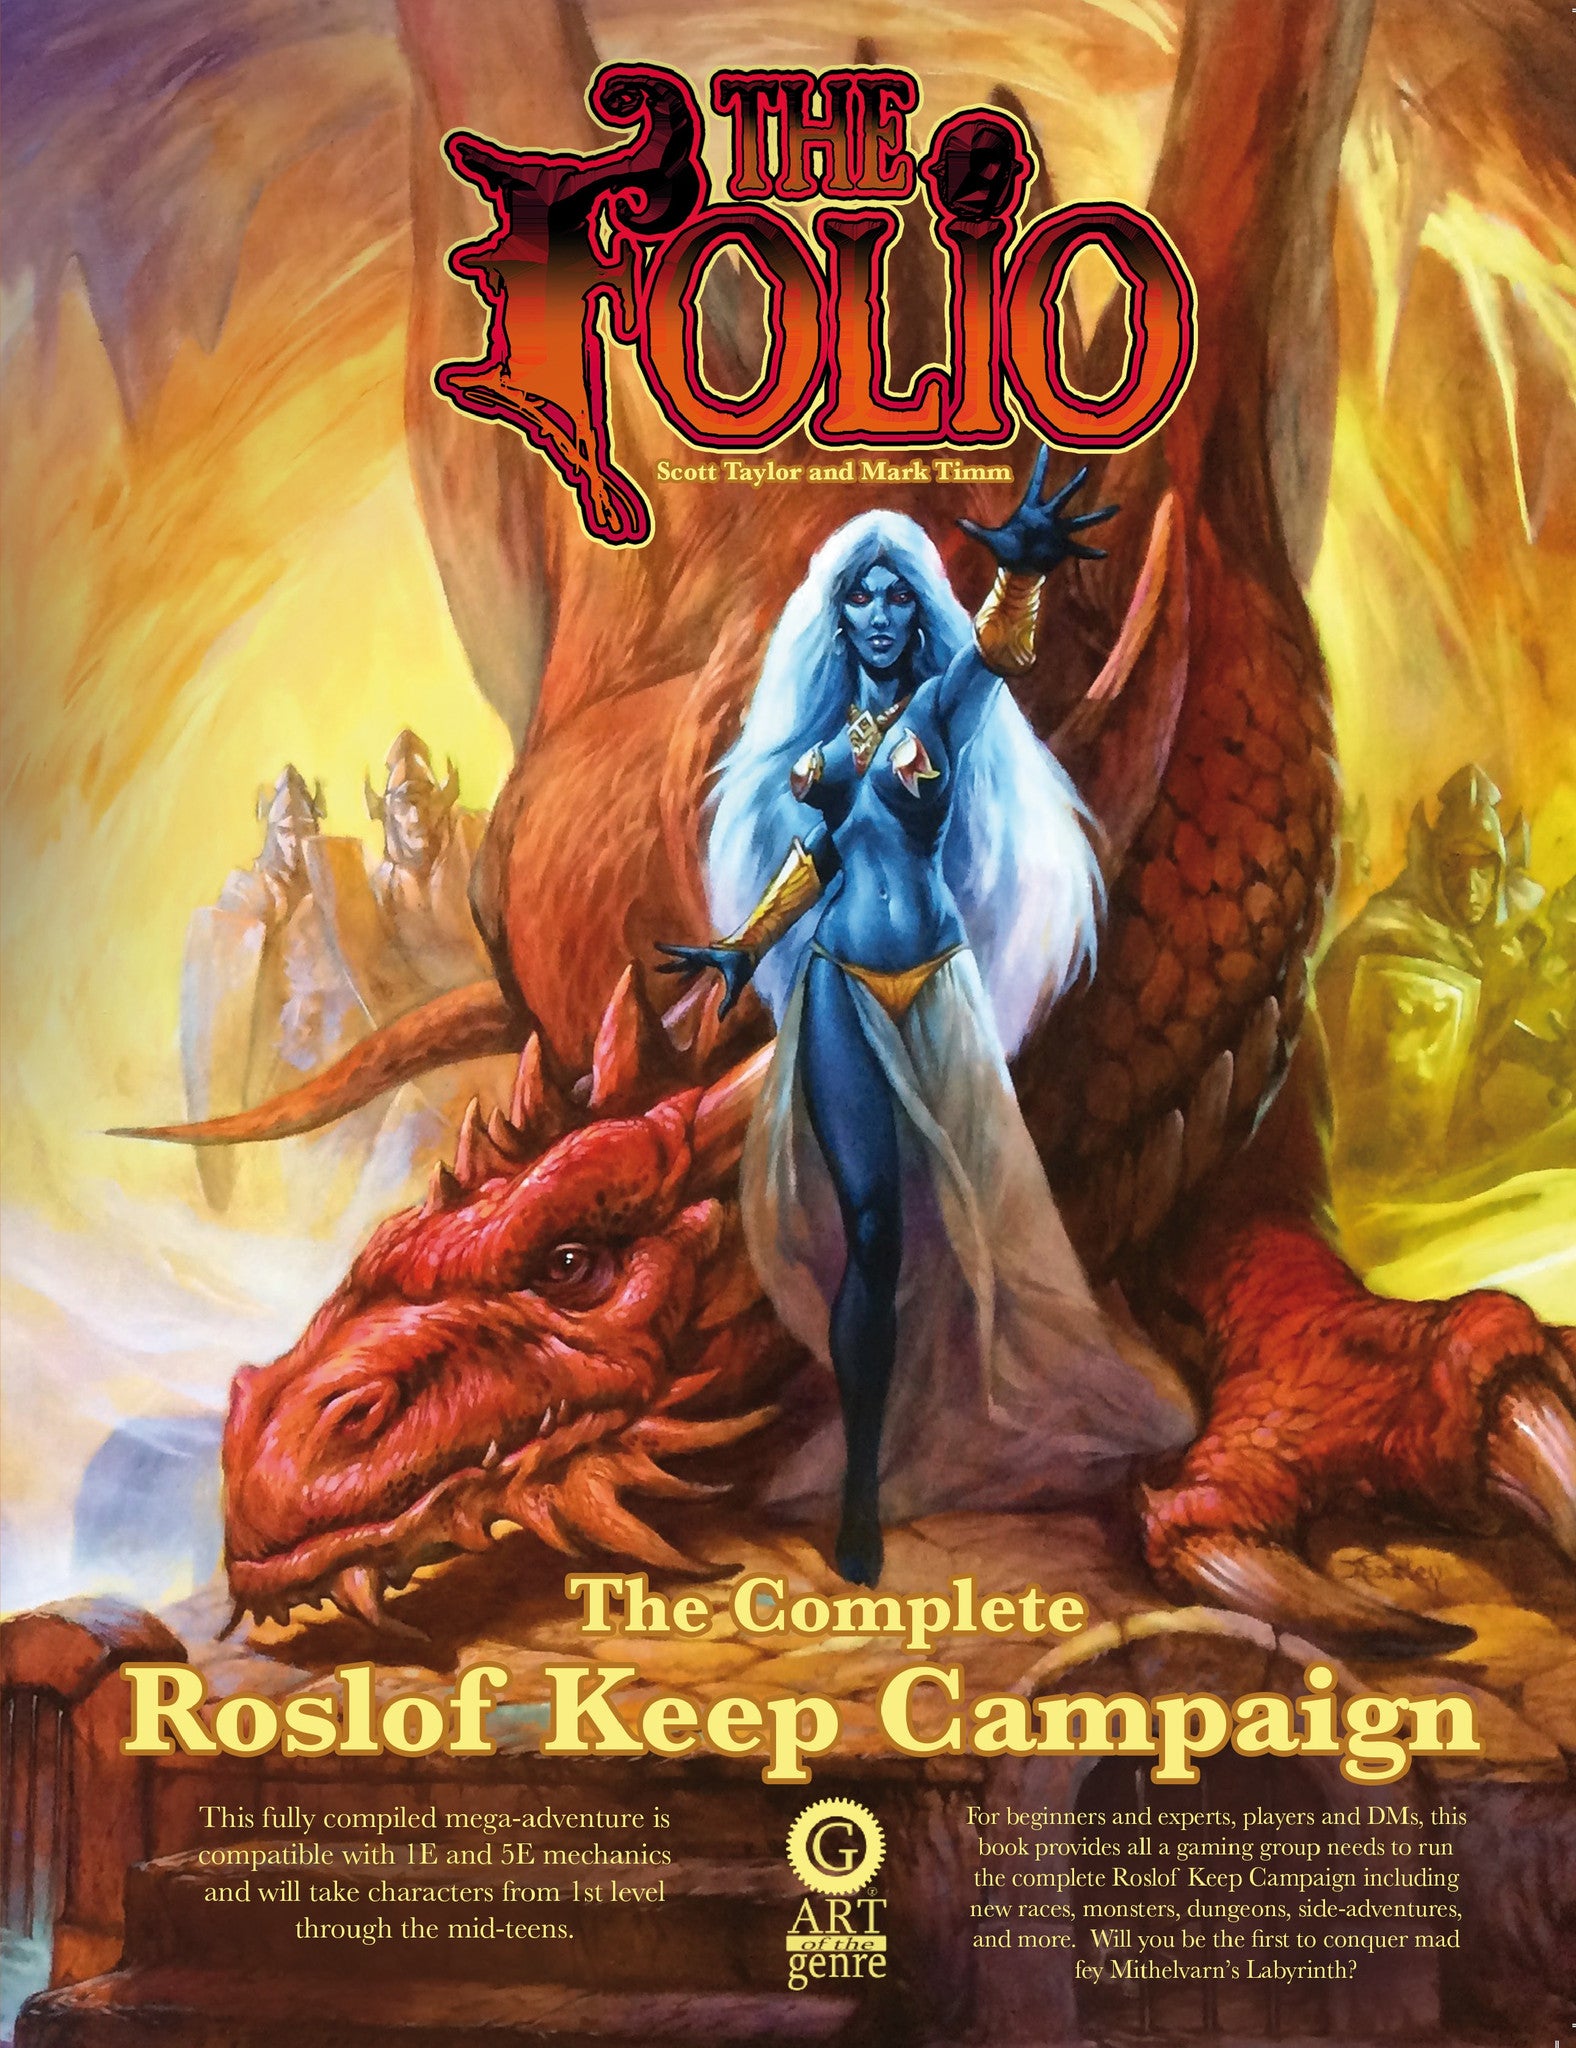 THE COMPLETE ROSLOF KEEP CAMPAIGN [HARDCOVER]